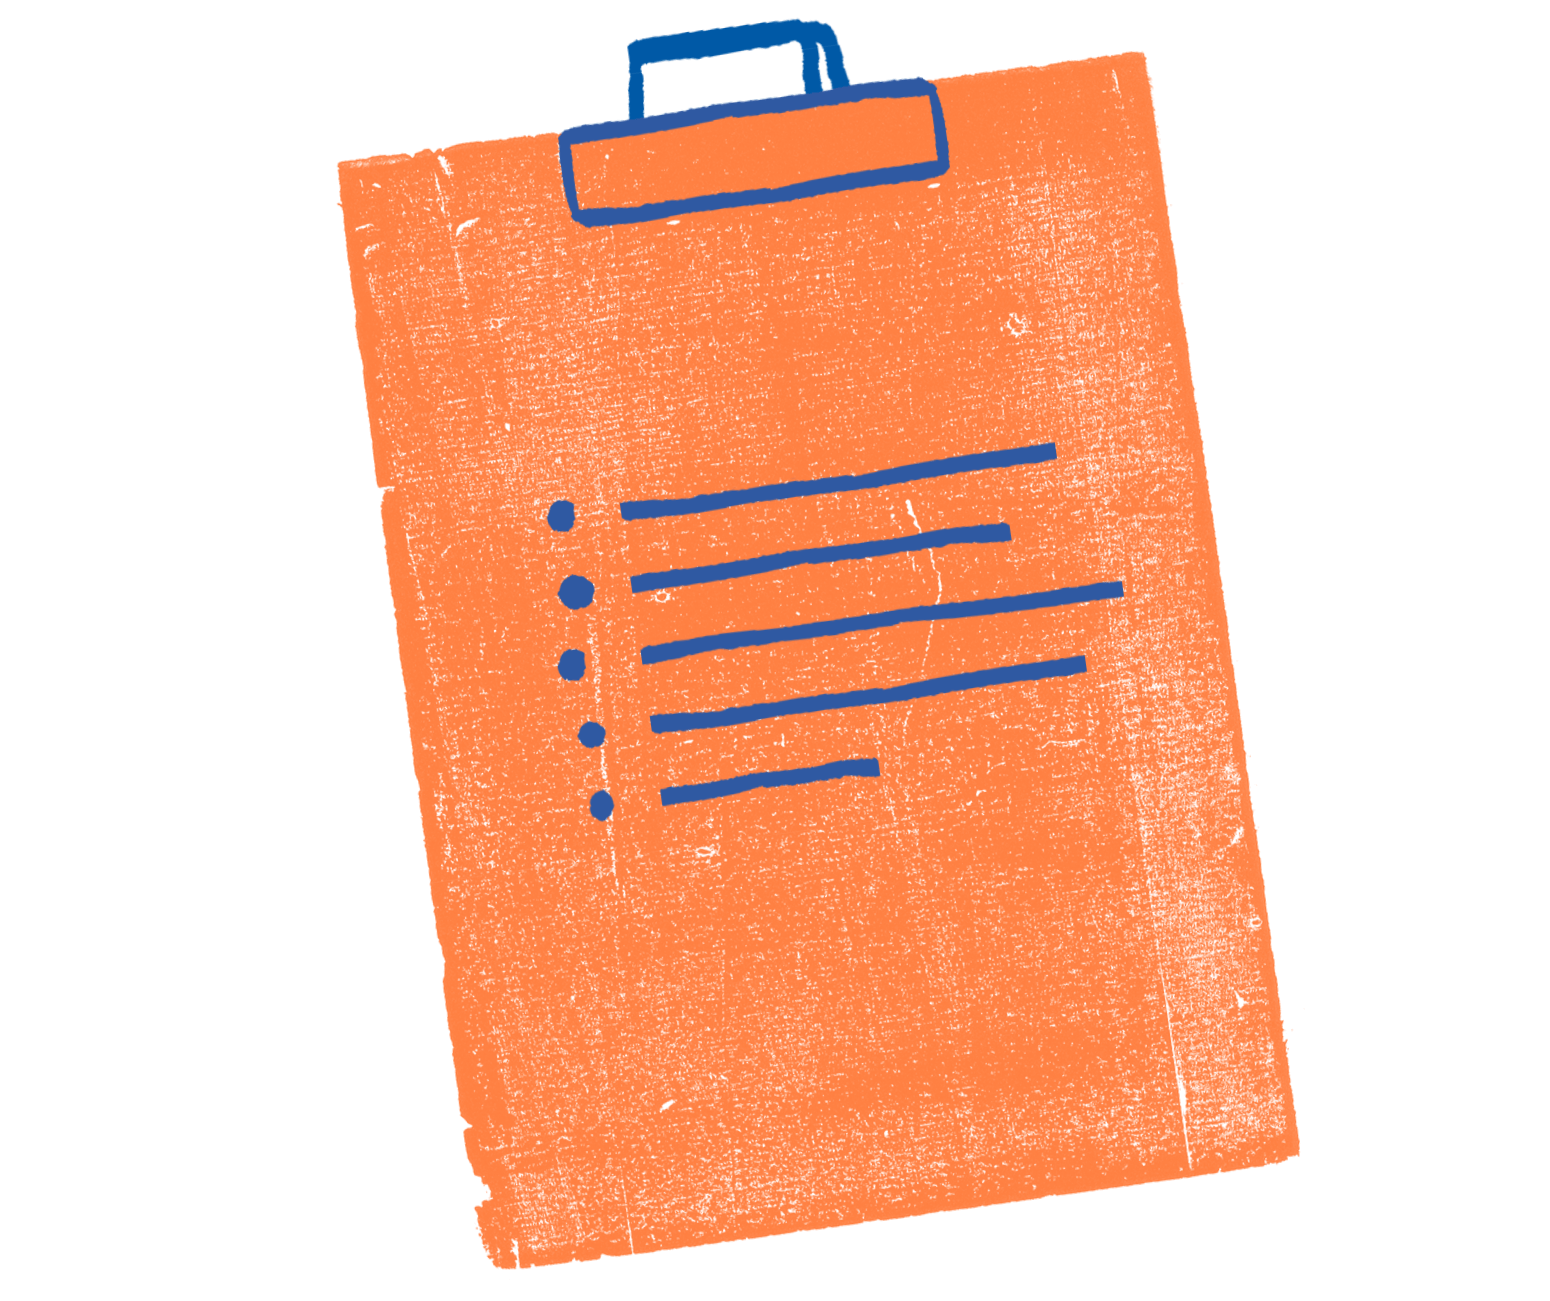 Illustration of a clipboard